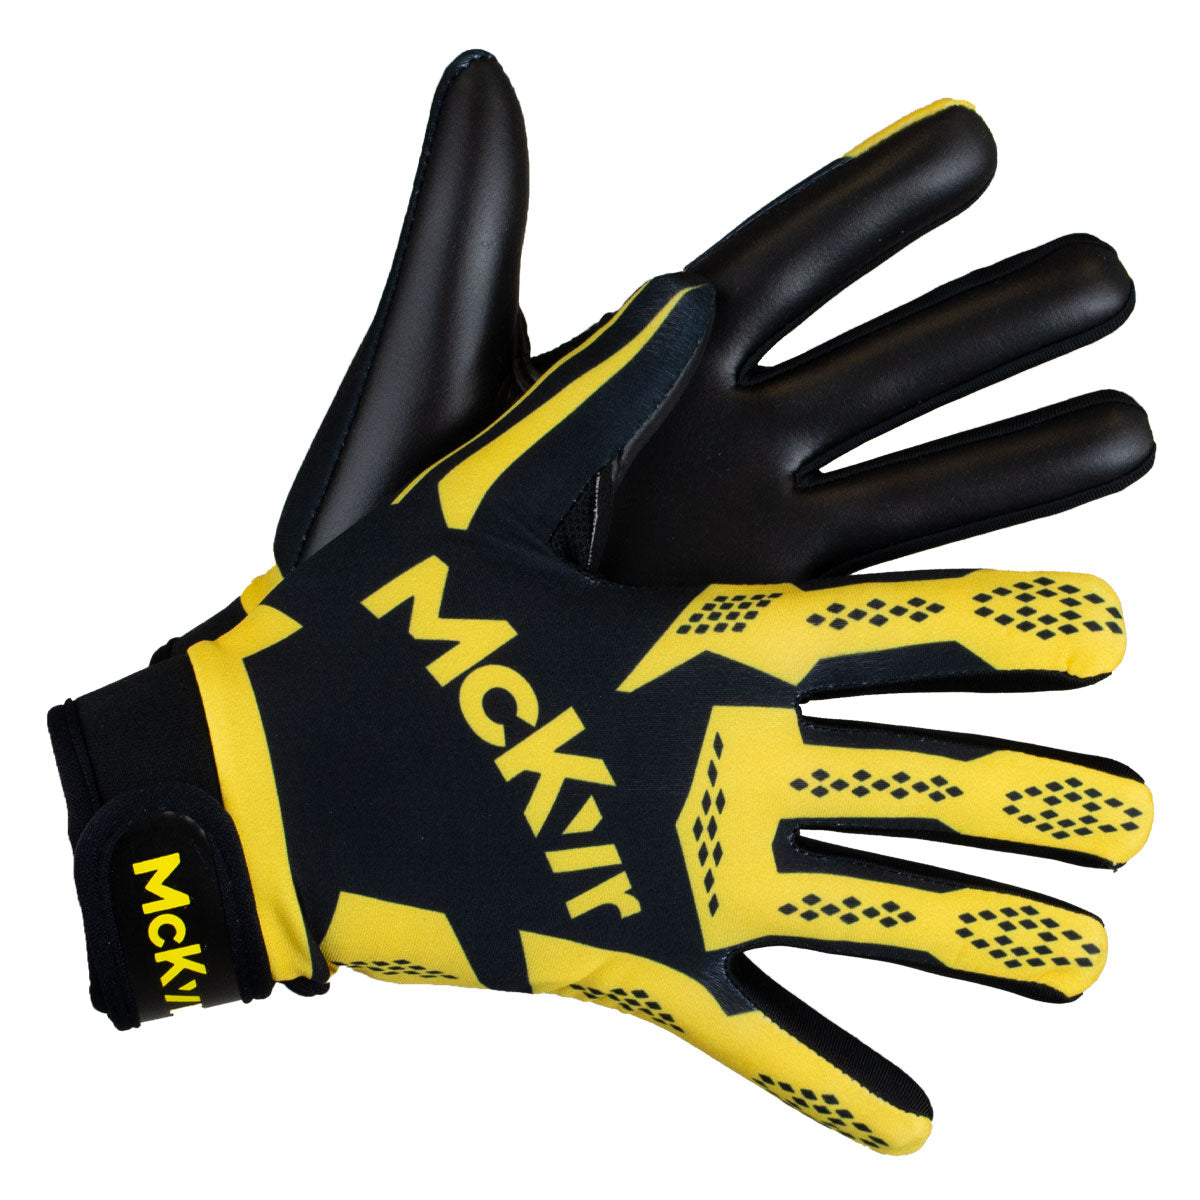 Mc Keever 2.0 Gaelic Gloves - Youth - Black/Yellow